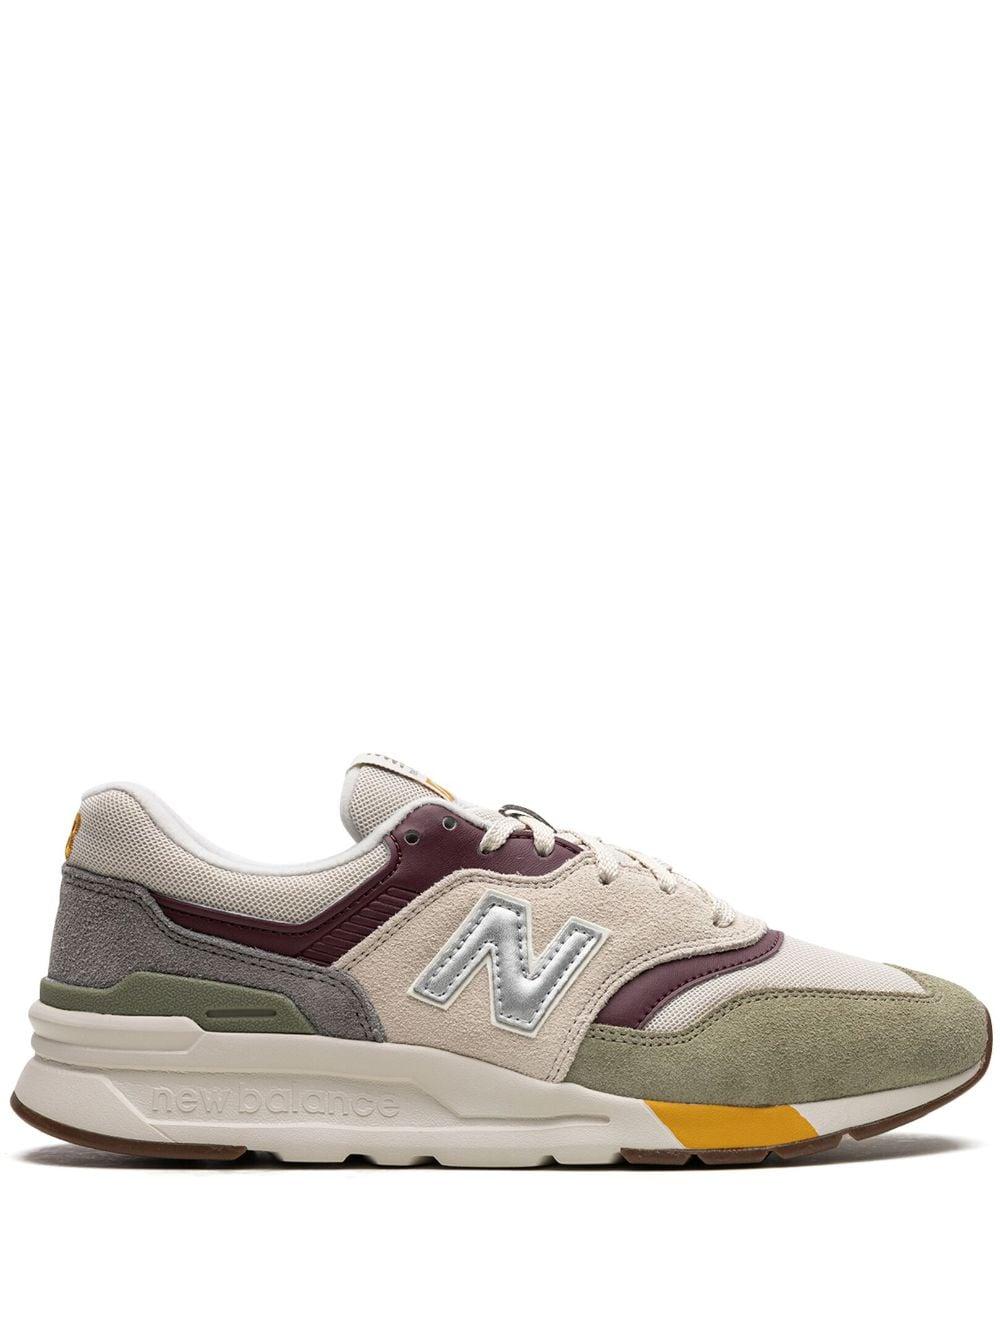 New Balance 997 "low Beige" Suede Sneakers in Natural | Lyst